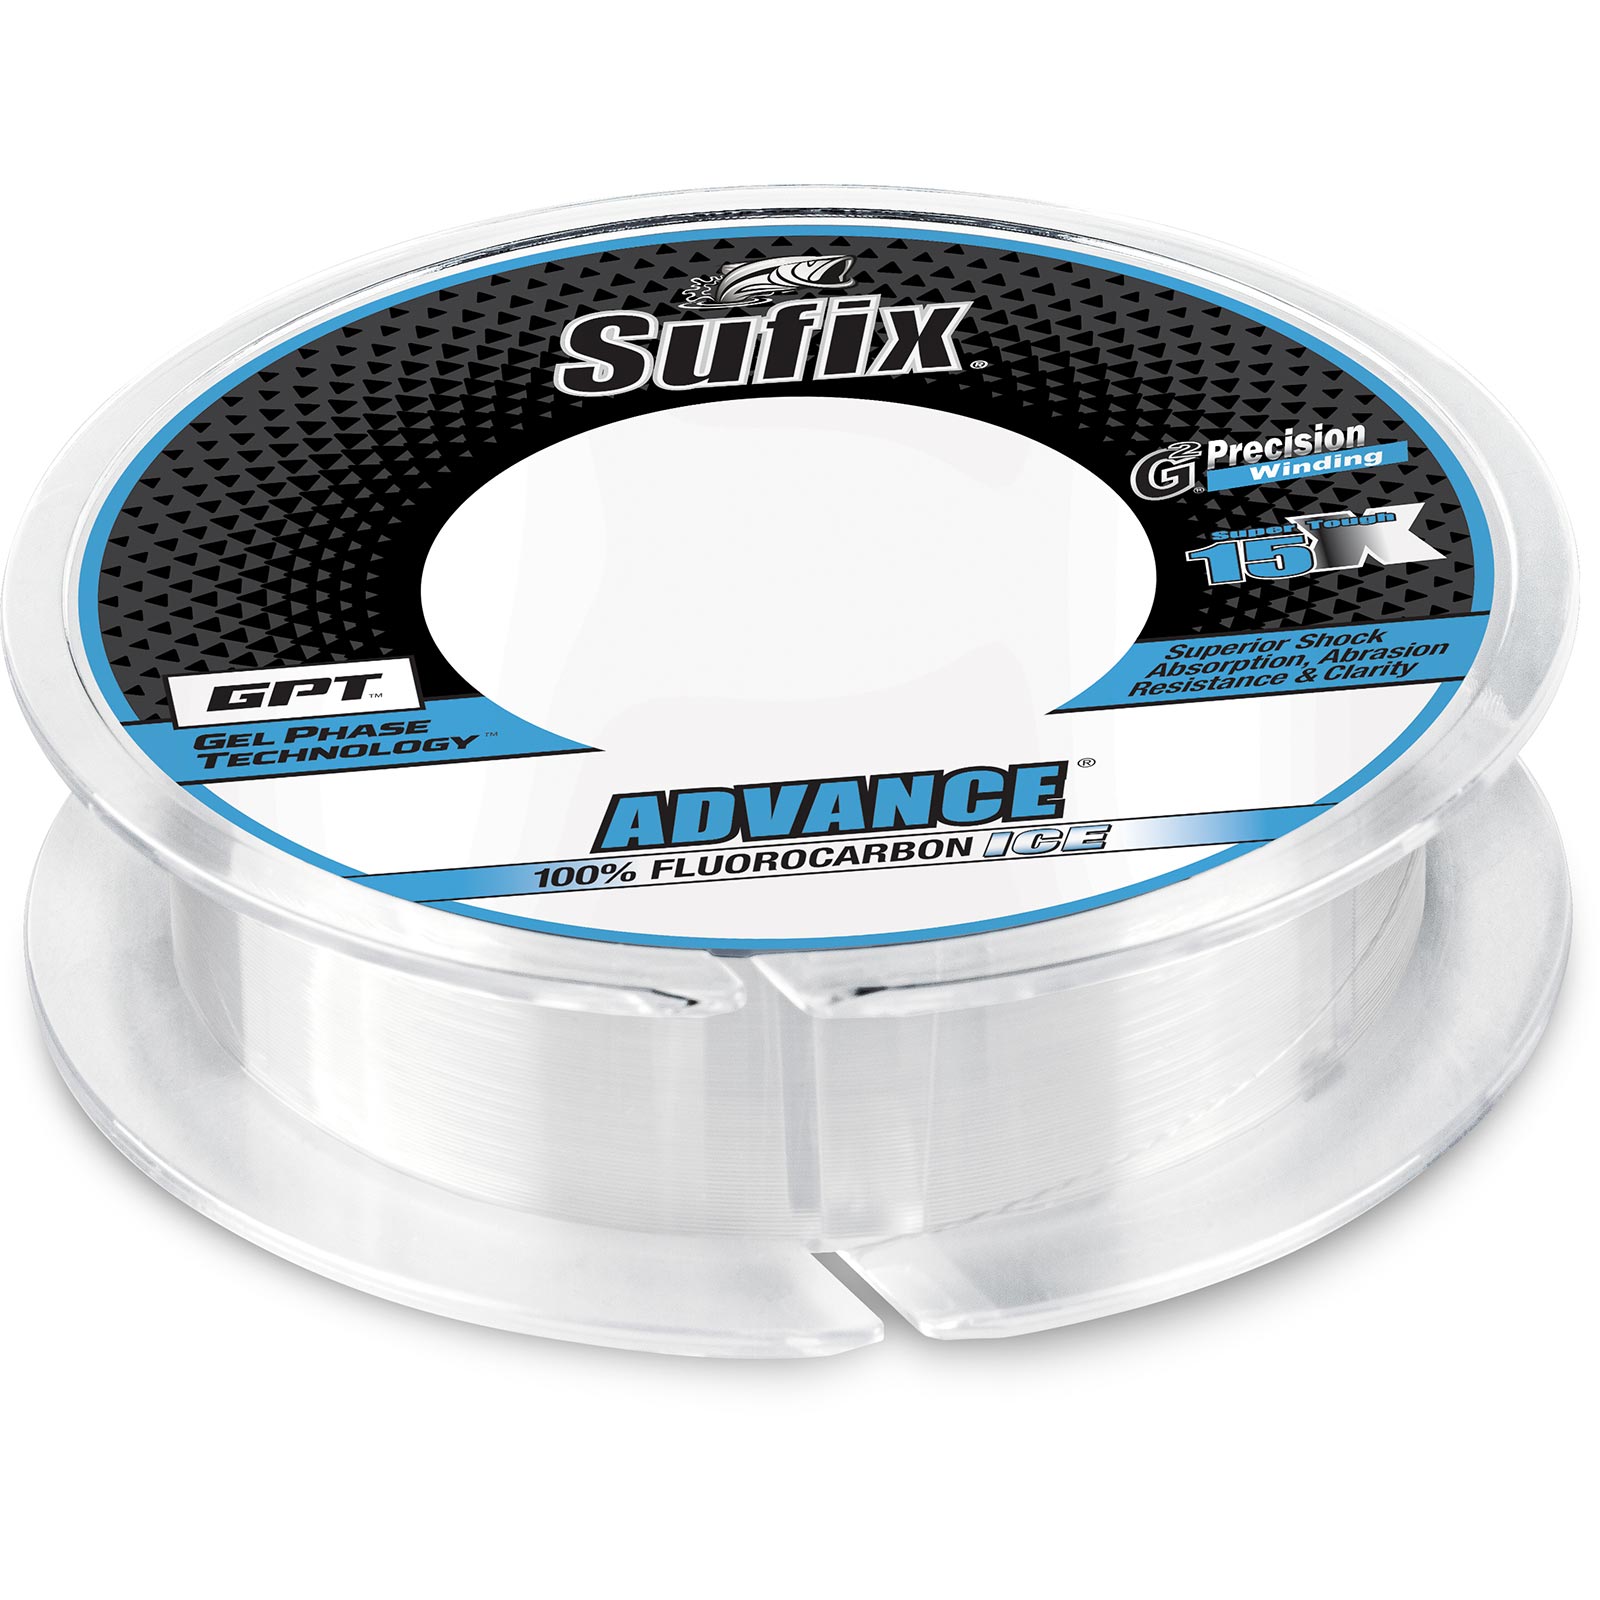 Sufix Invisiline Ice Fluorocarbon 3lb Fishing Line 50Yds 